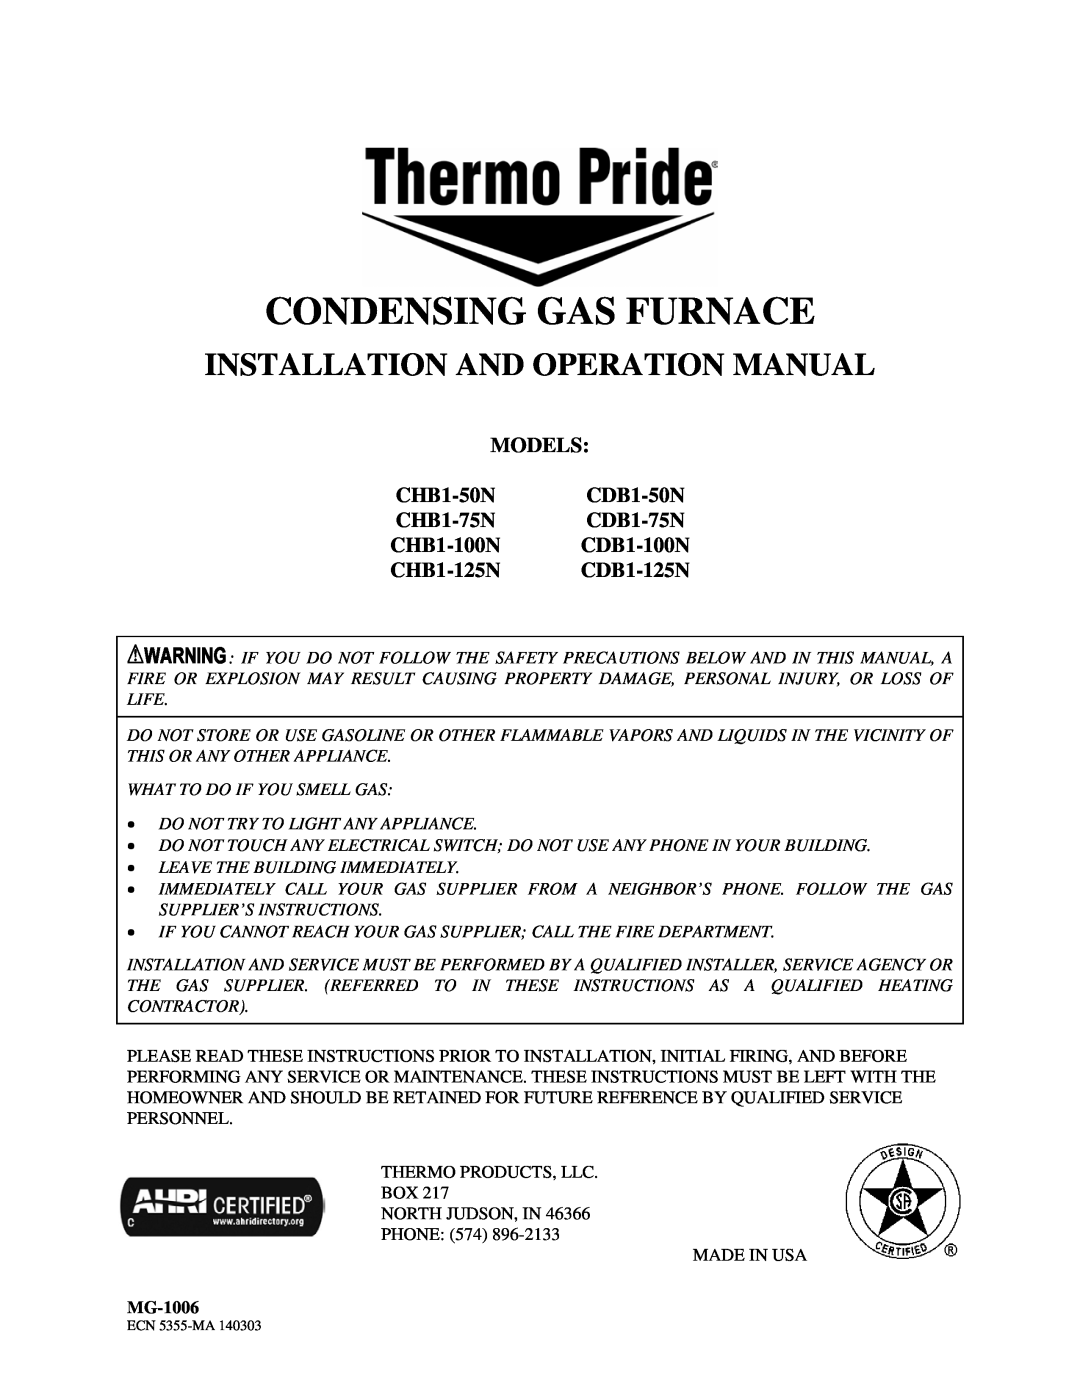 Thermo Products operation manual MODELS CHB1-50N CDB1-50N CHB1-75N CDB1-75N, CHB1-100N CDB1-100N CHB1-125N CDB1-125N 